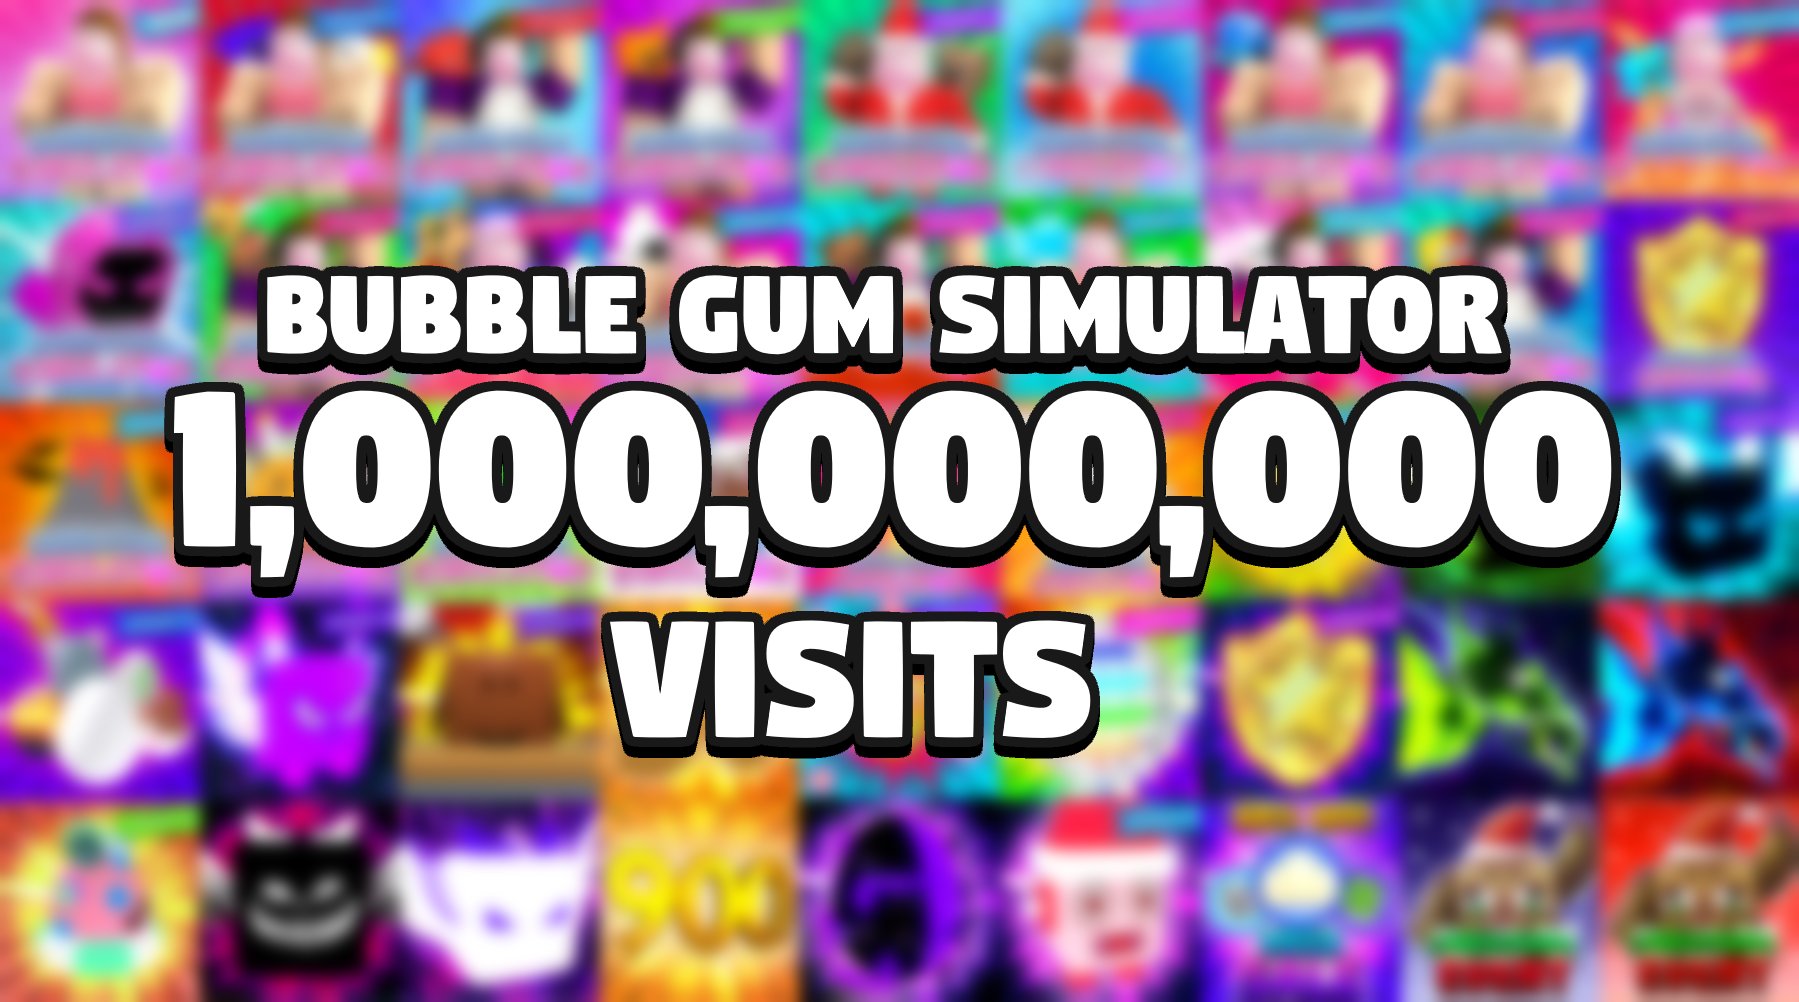 Bubble Gum Tower Defense codes – free packs and gems